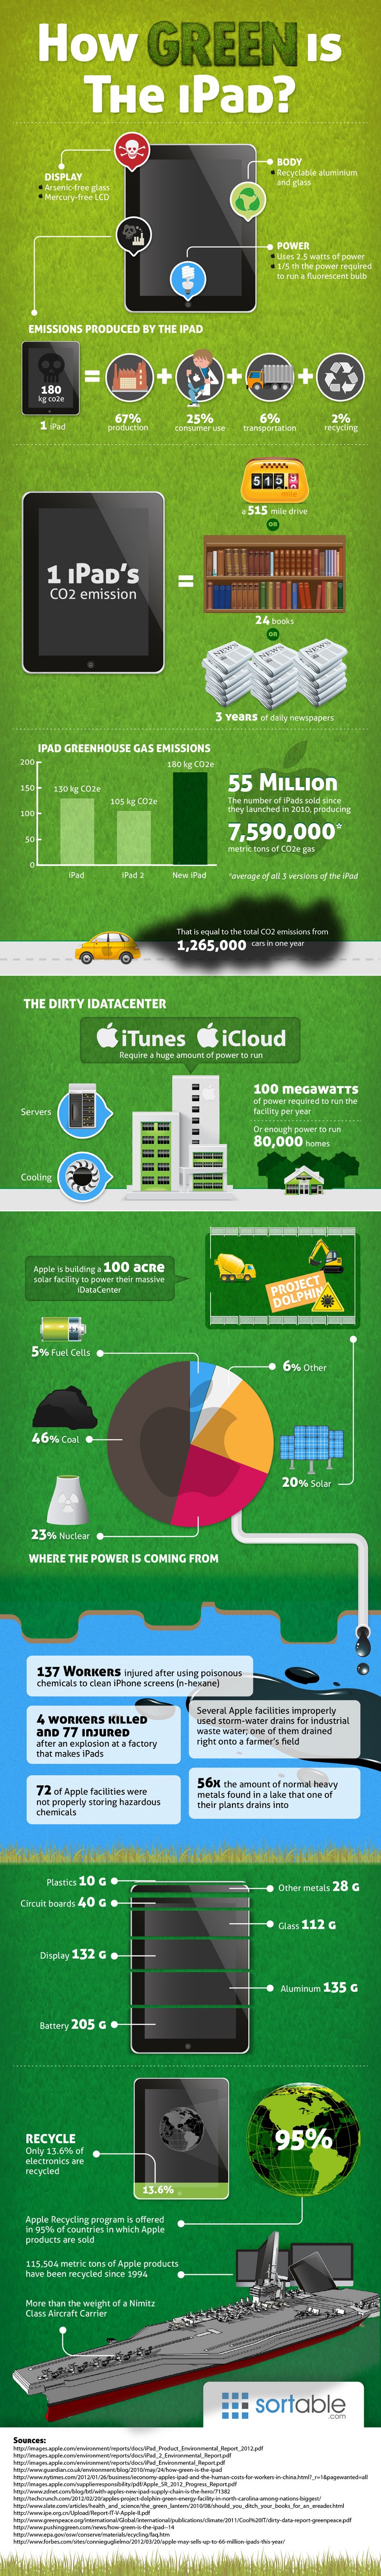 How Green is the iPad? [Infographic]